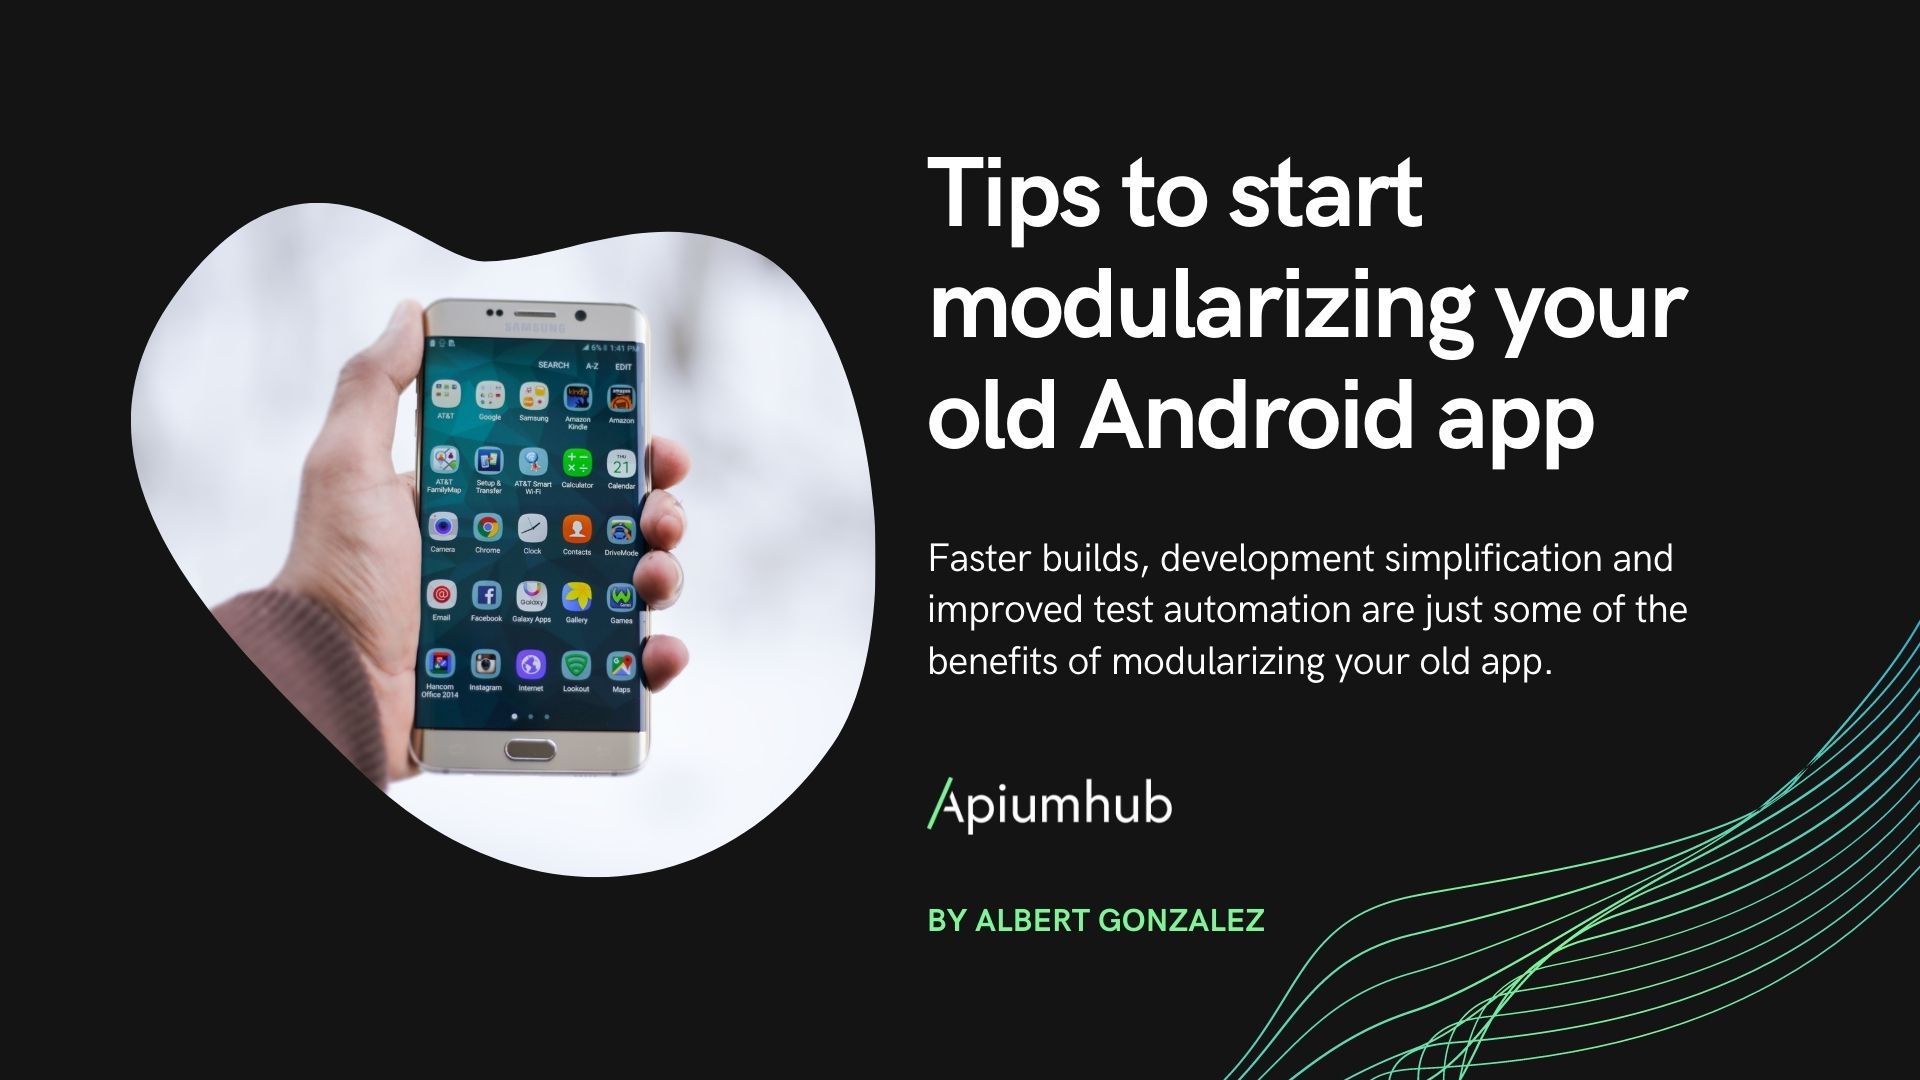 Android App Modularization: 4 Useful Tips to Start